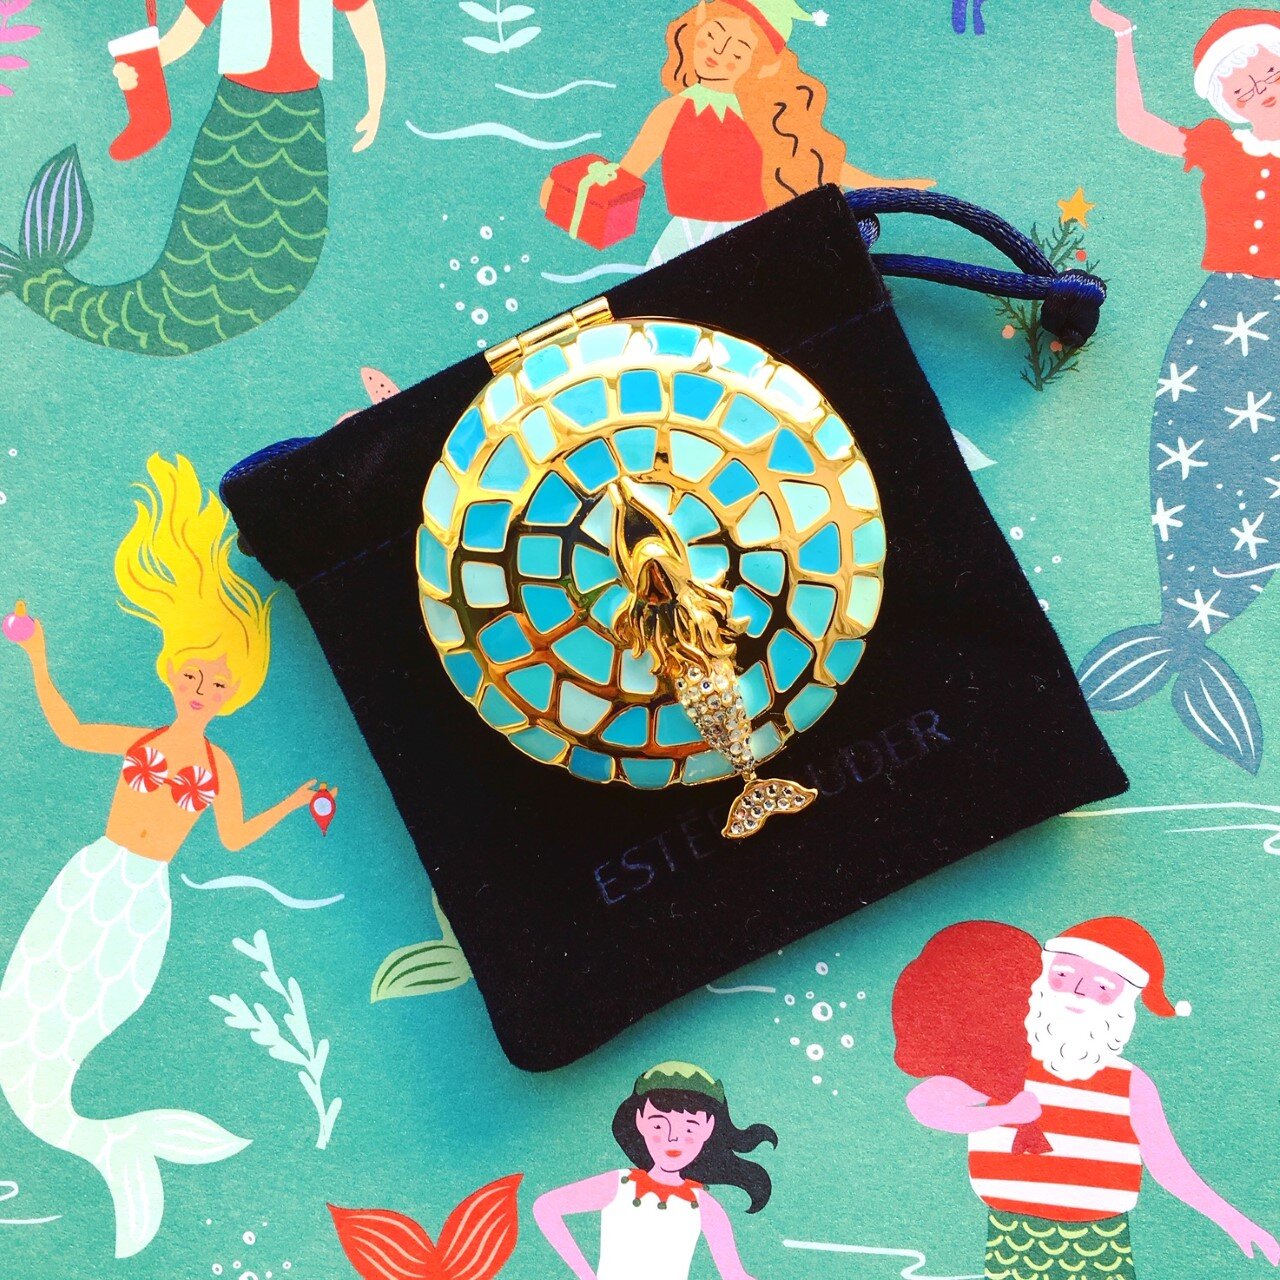   Lady of the Sea Compact Estée Lauder Holiday 2017   Estée Lauder teamed up with jewelry designer Monica Rich Kosann for a second time in 2017 to create another line of keepsake compacts for the holiday season. As part of the ocean-inspired collecti